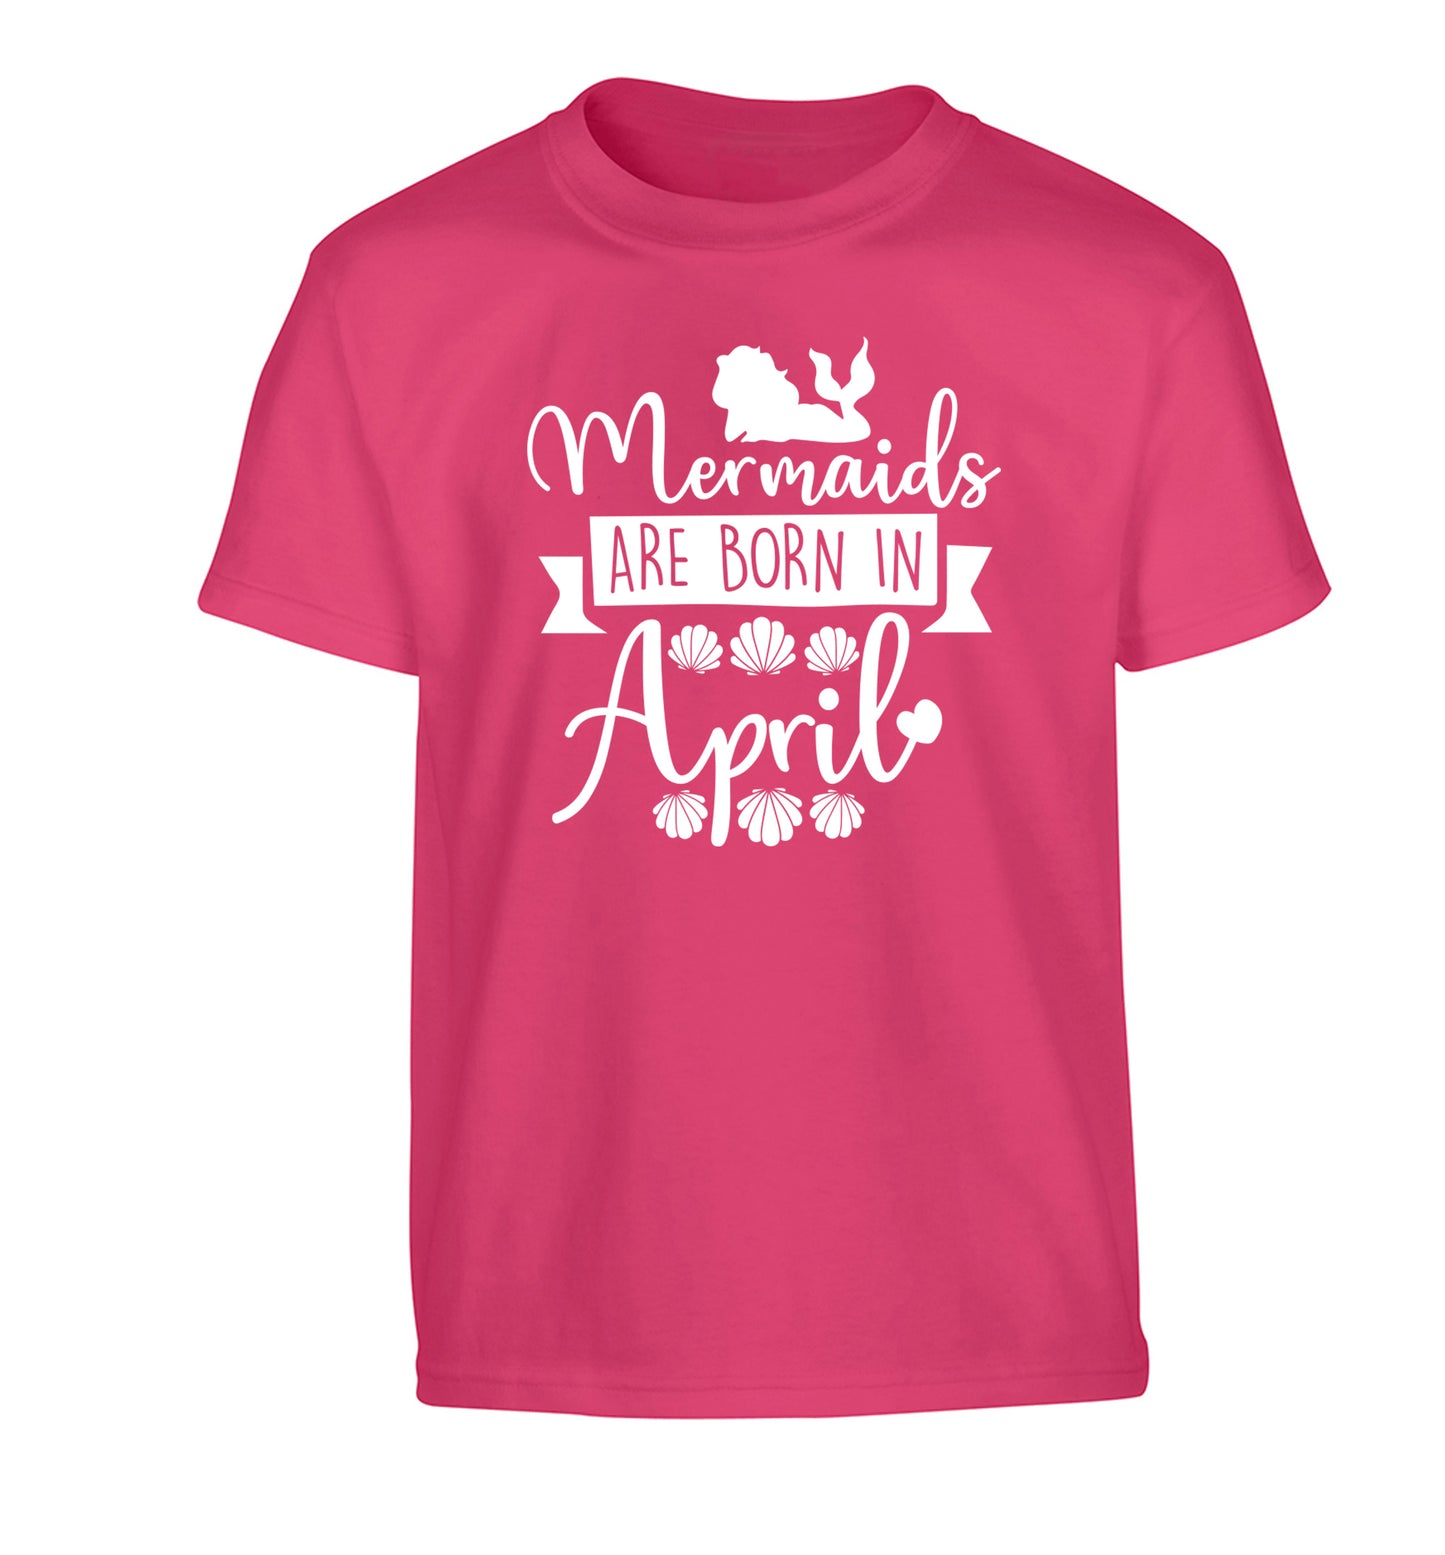 Mermaids are born in April Children's pink Tshirt 12-13 Years